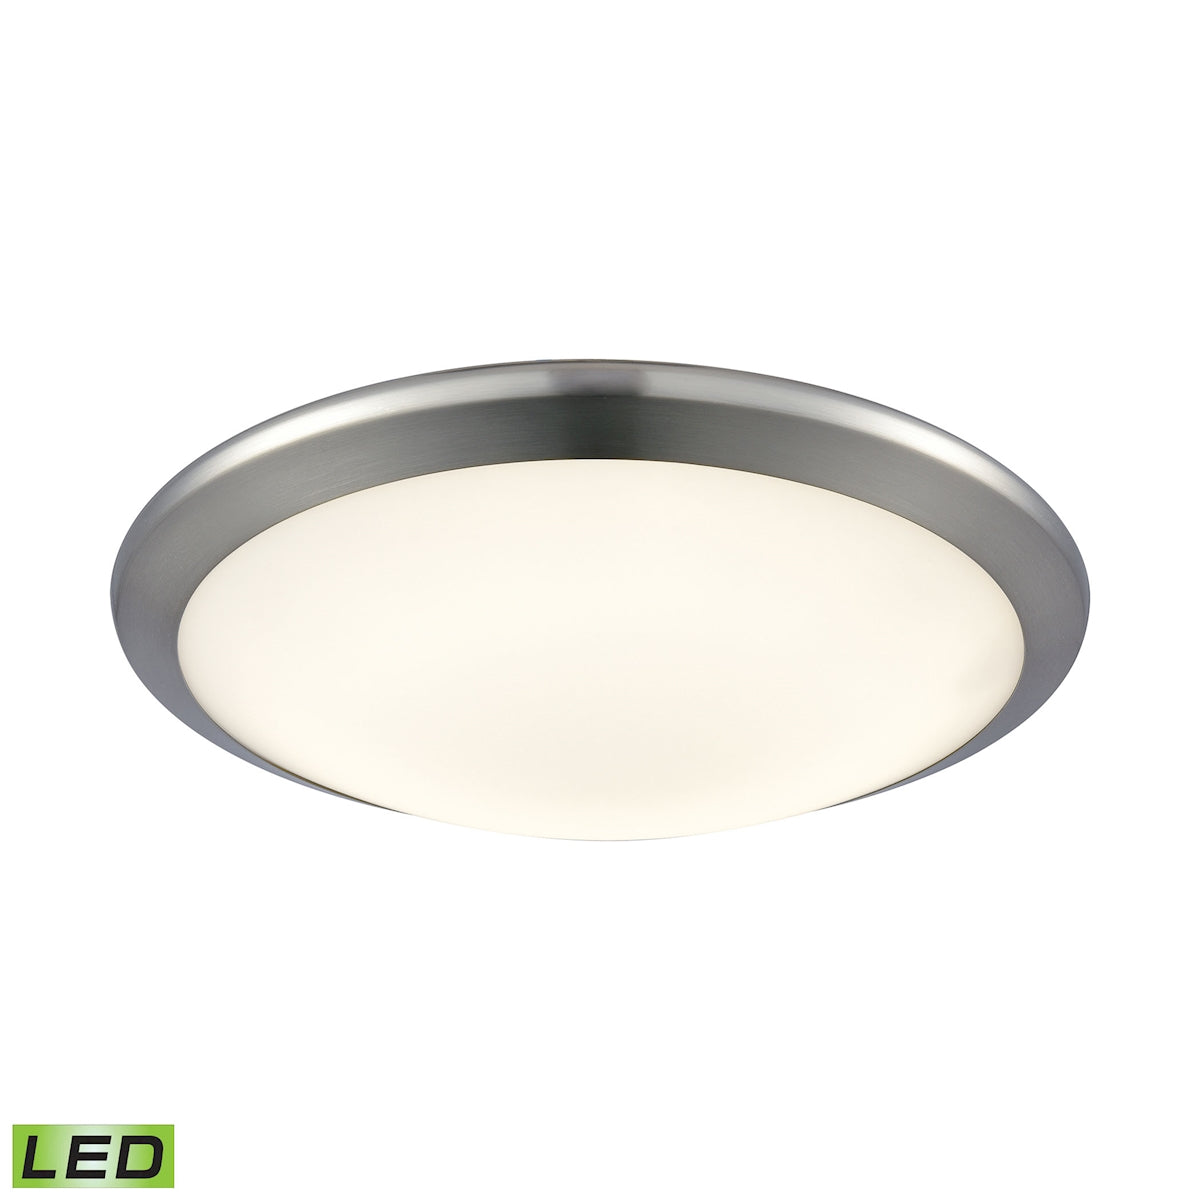 ELK Lighting FML4525-10-15 Clancy 1-Light Round Flush Mount in Chrome with Opal Glass - Integrated LED - Small